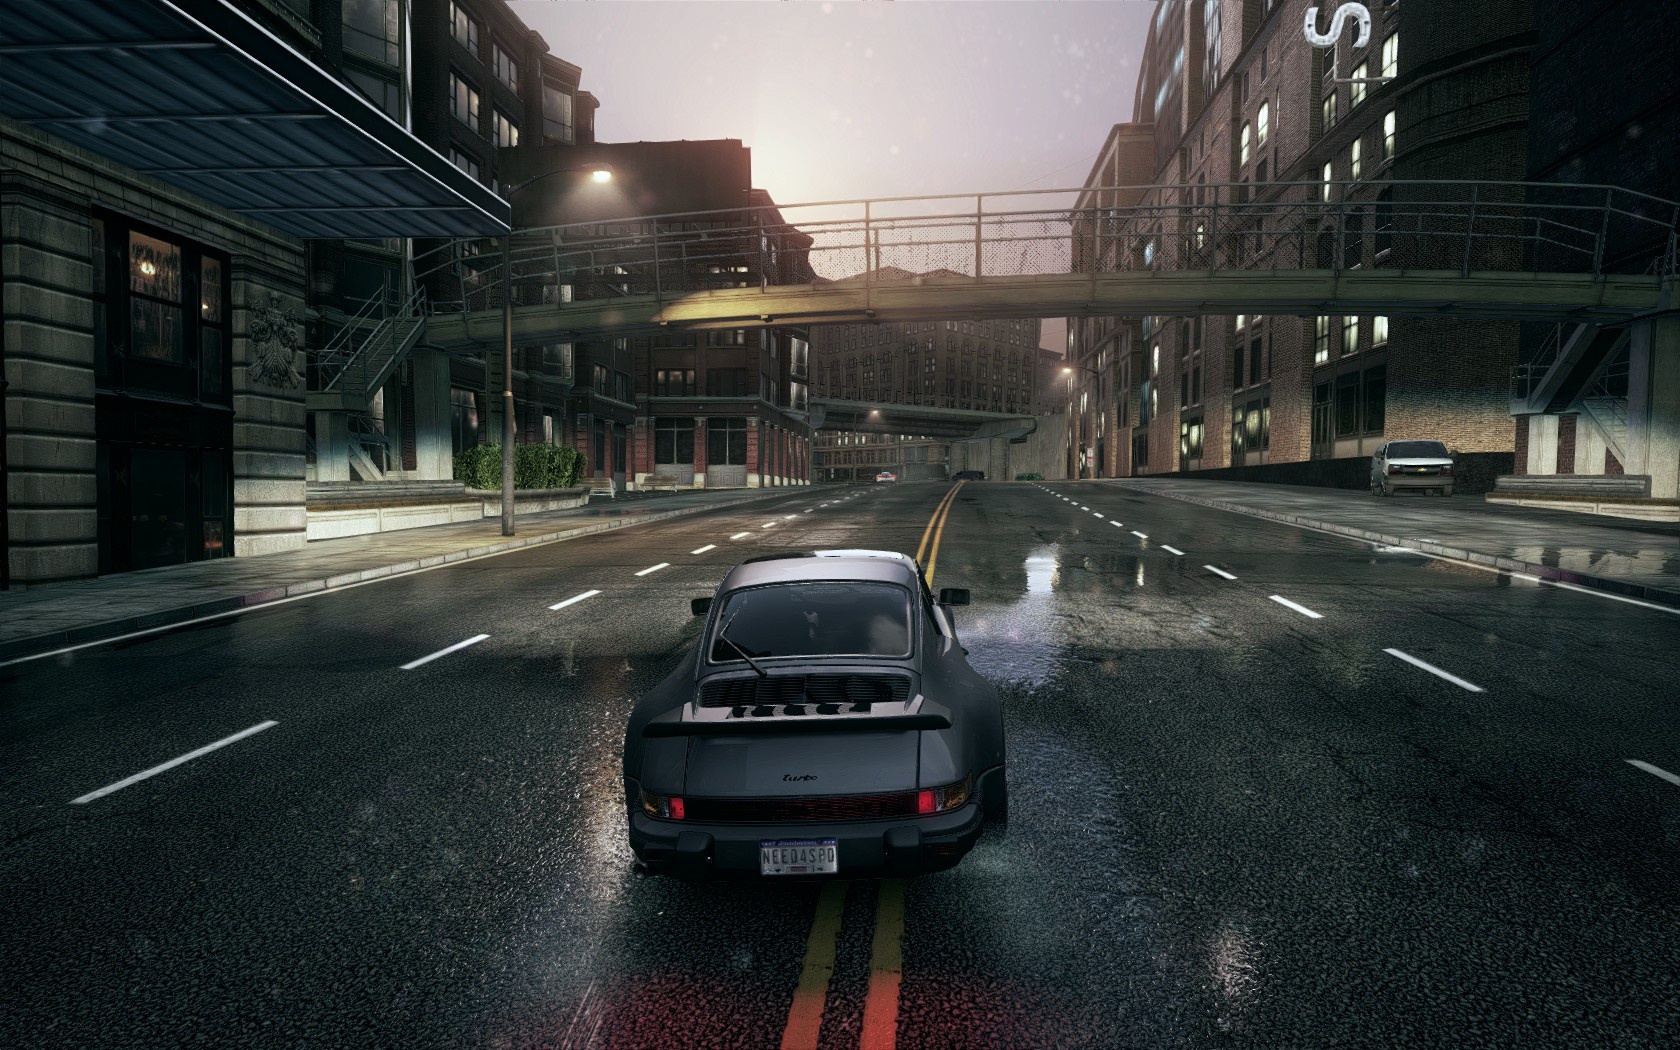 Nfs города. NFS MW 2012 мост. Город NFS most wanted 2012. Скриншот из NFS 2012. Need for Speed mostwanted 2012.